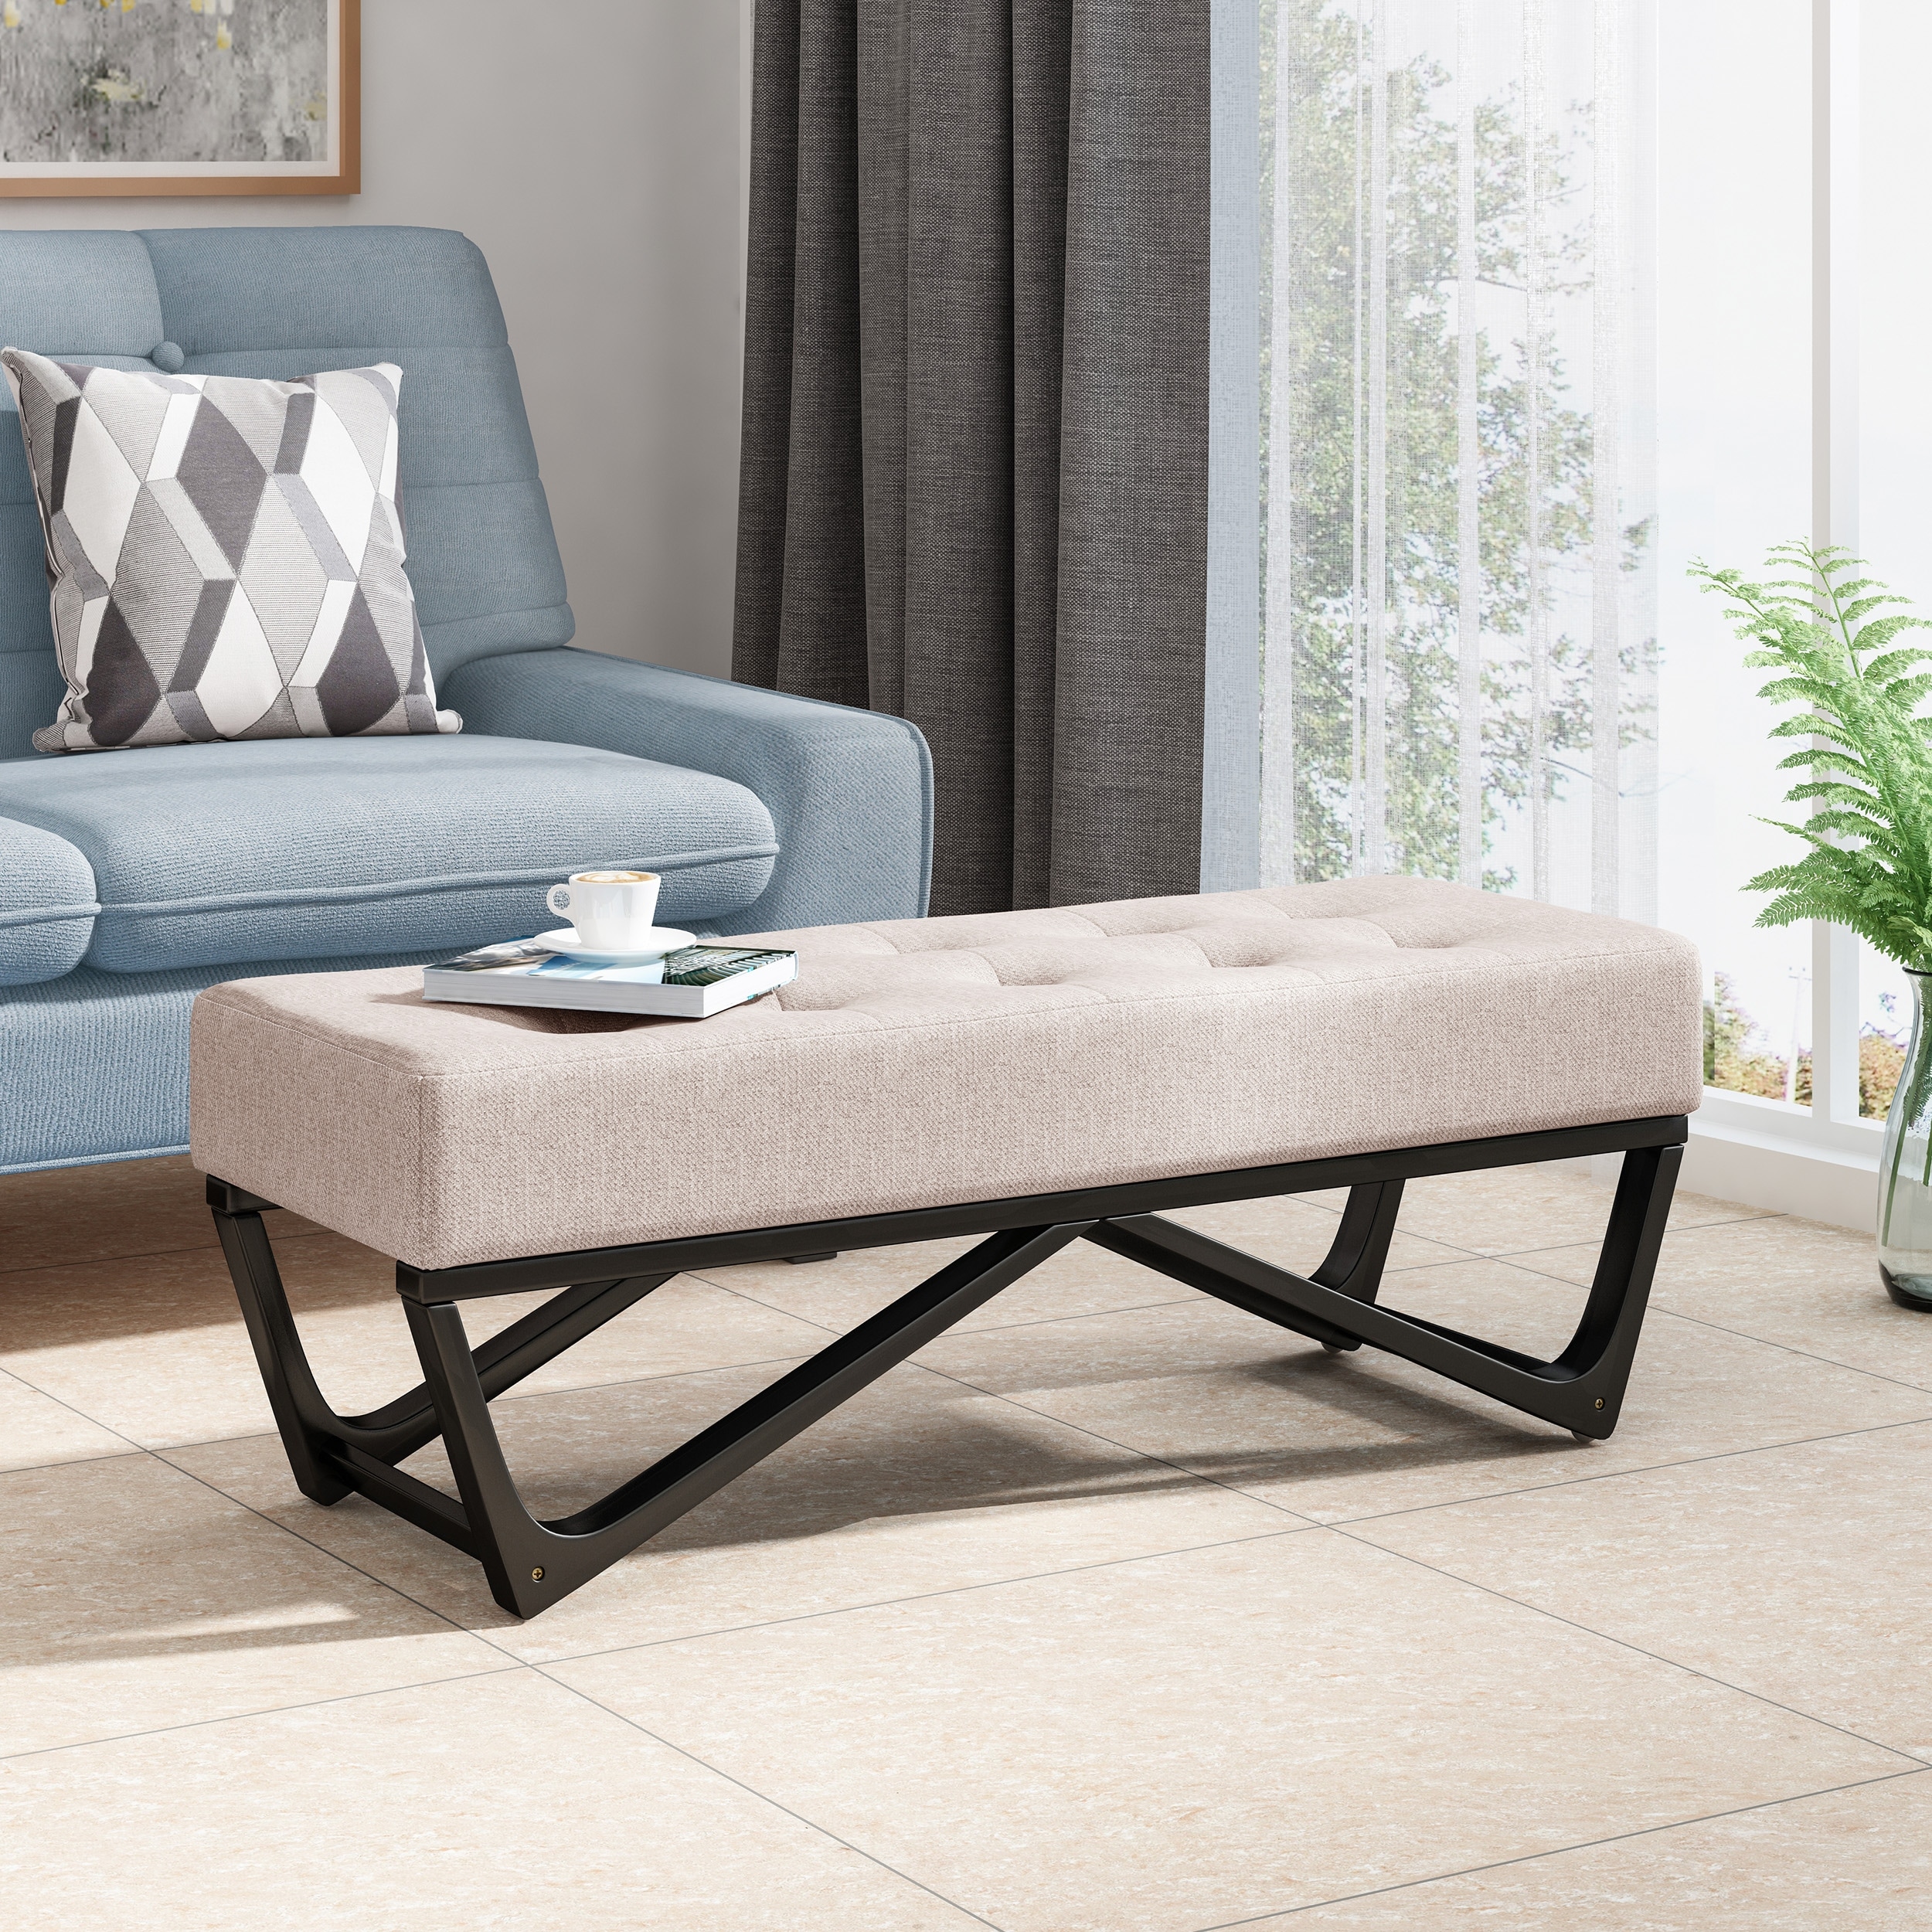 https://ak1.ostkcdn.com/images/products/is/images/direct/cb38f991dd582dad20413a5c942e0e6f9135d7f2/Assisi-Contemporary-Fabric-Ottoman-Bench-by-Christopher-Knight-Home.jpg